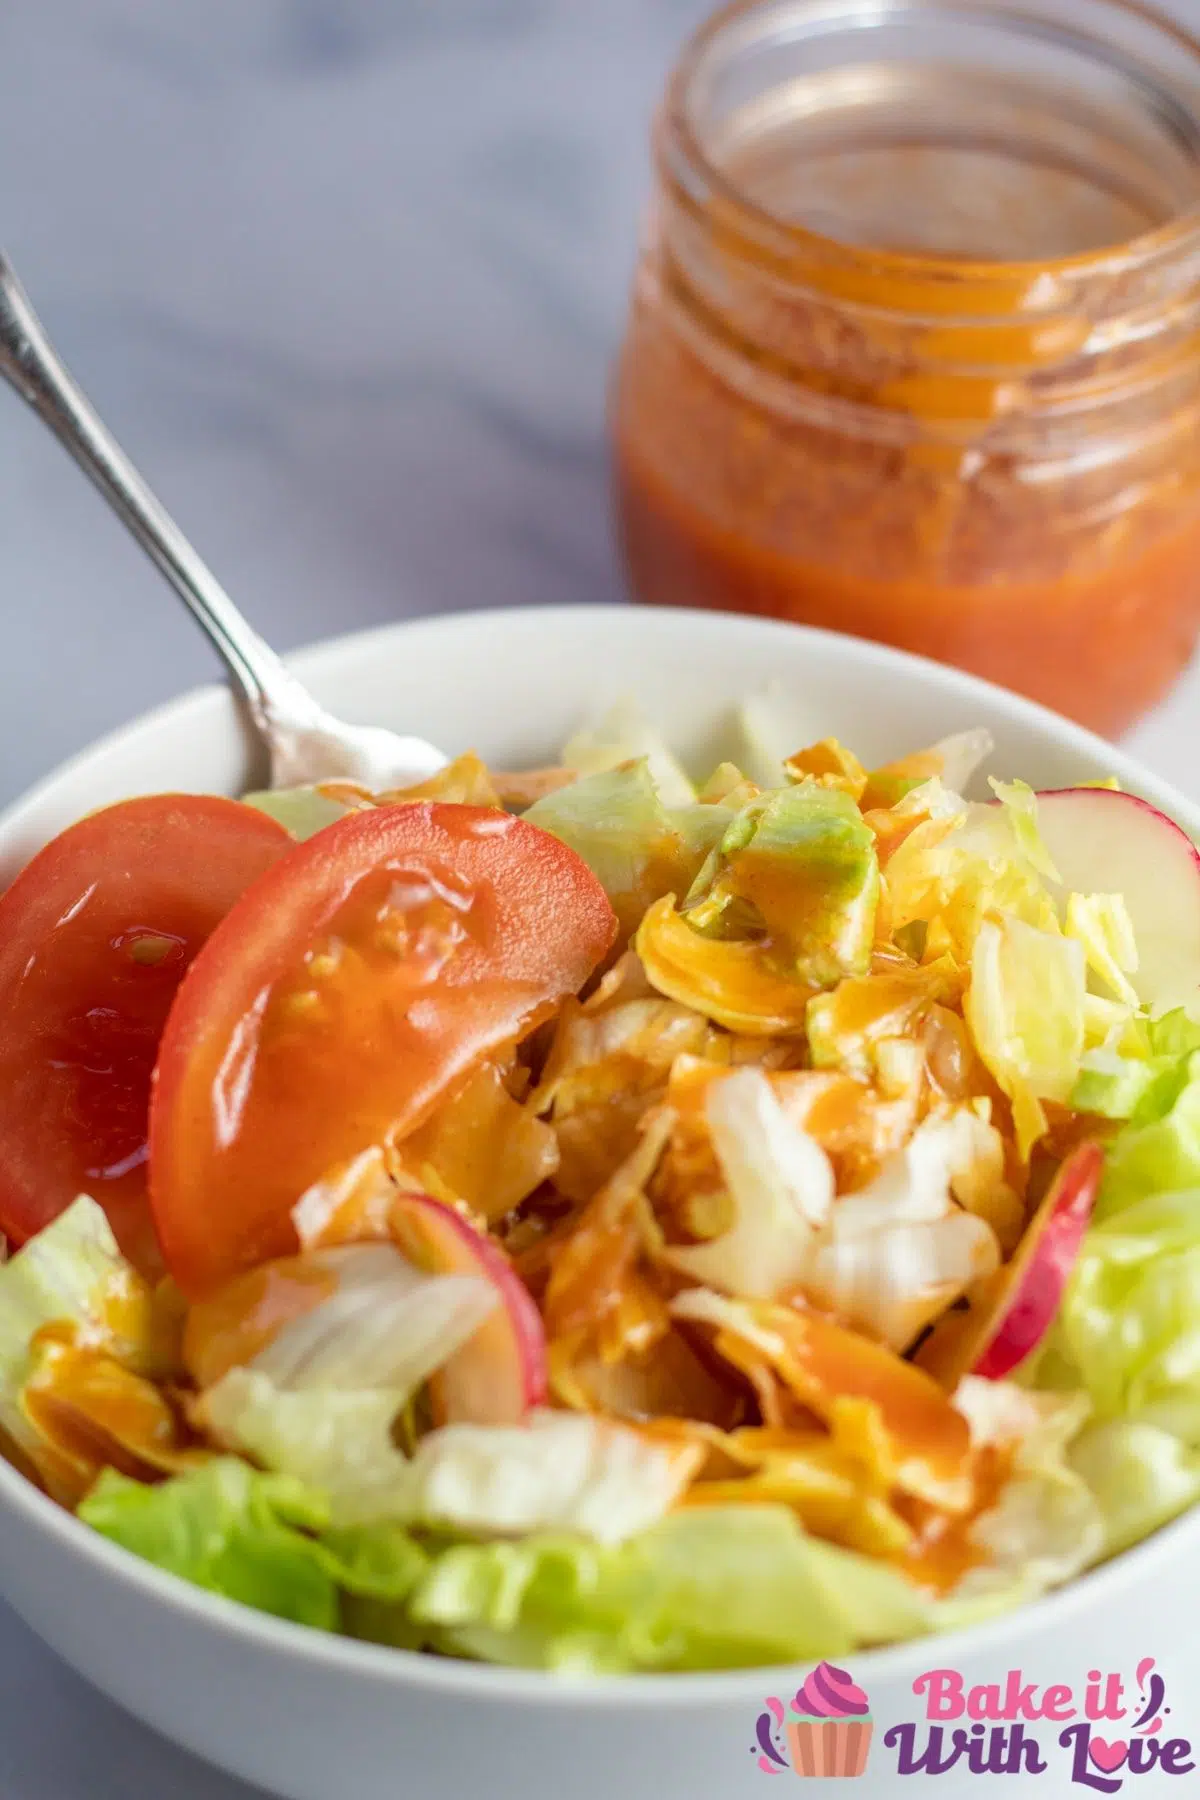 Tall image of salad with catalina dressing.